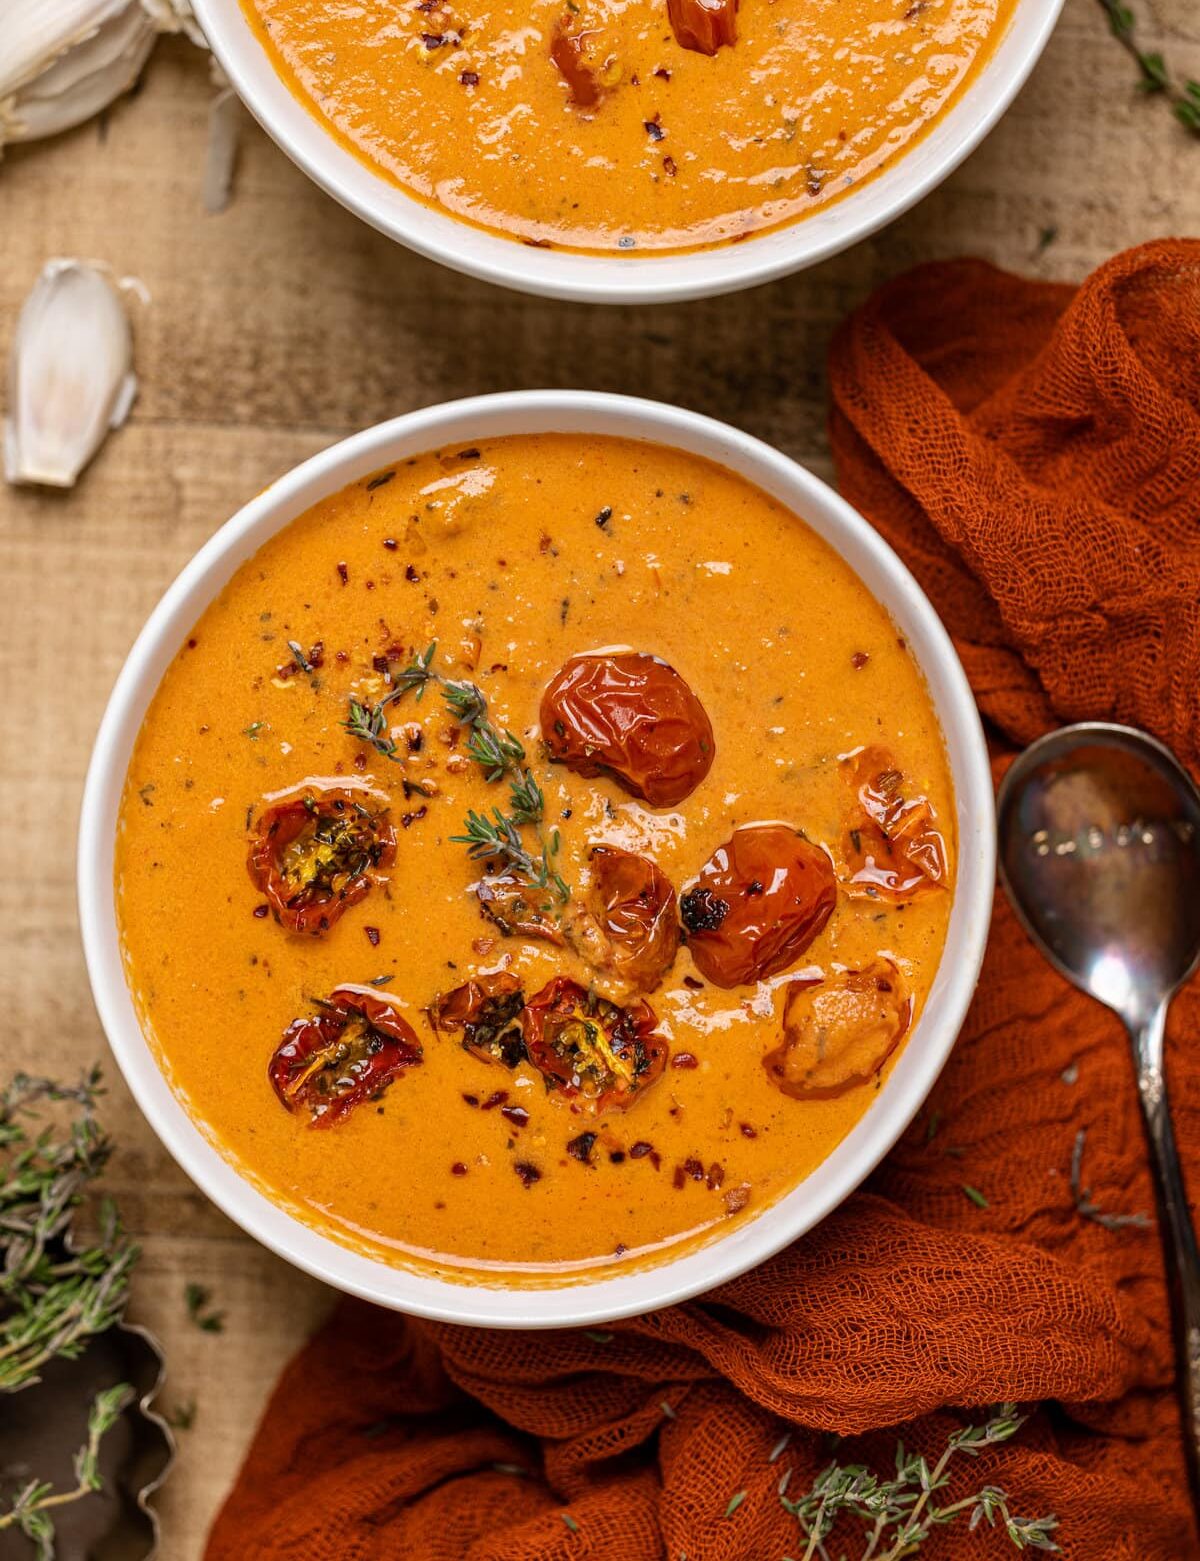 https://www.orchidsandsweettea.com/wp-content/uploads/2022/10/Roasted-Tomato-Soup-10-of-10-e1664782566868.jpg